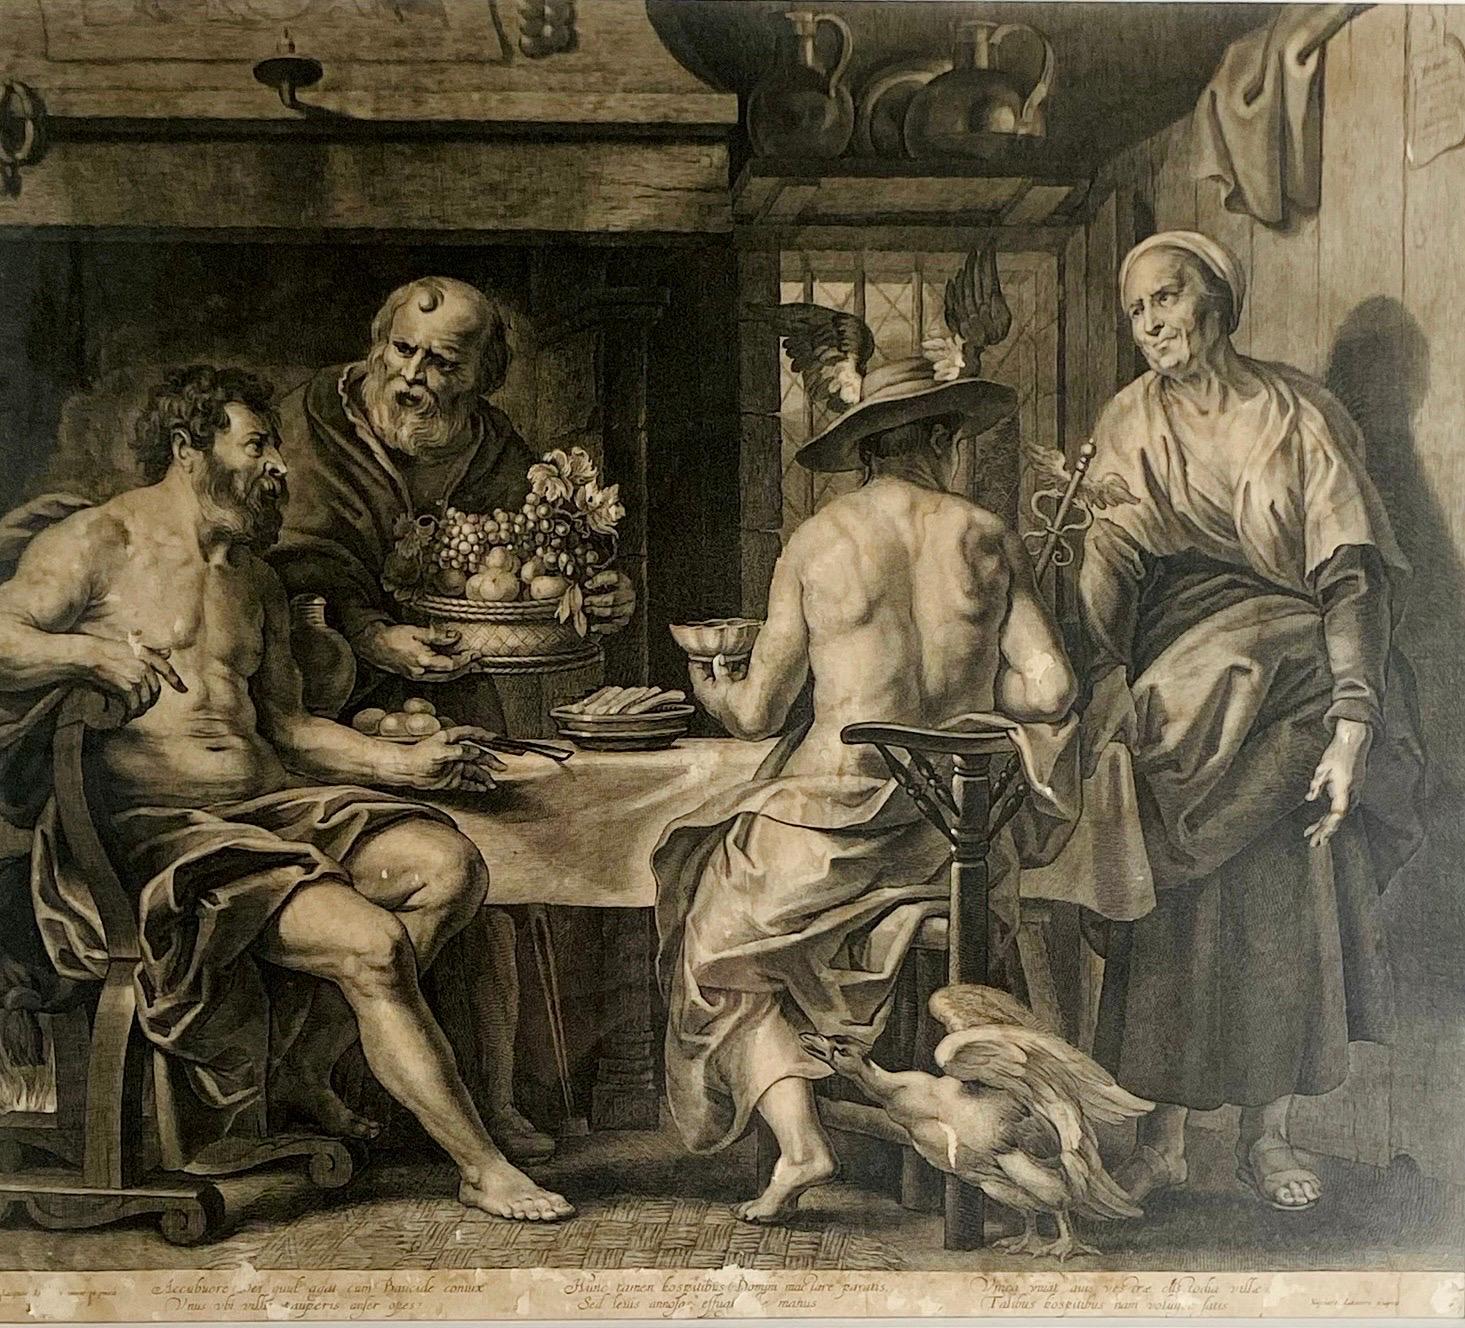 Large and beautiful etching, engraving by Nicolaes Lauwers after Jacob Jordaens.
Flanders, 17th century.
Representing Zeus and Hermes (Jupiter and Mercury) in the house of Philemon and Baucis.

Very nice dimensions. Beautiful framing.

The